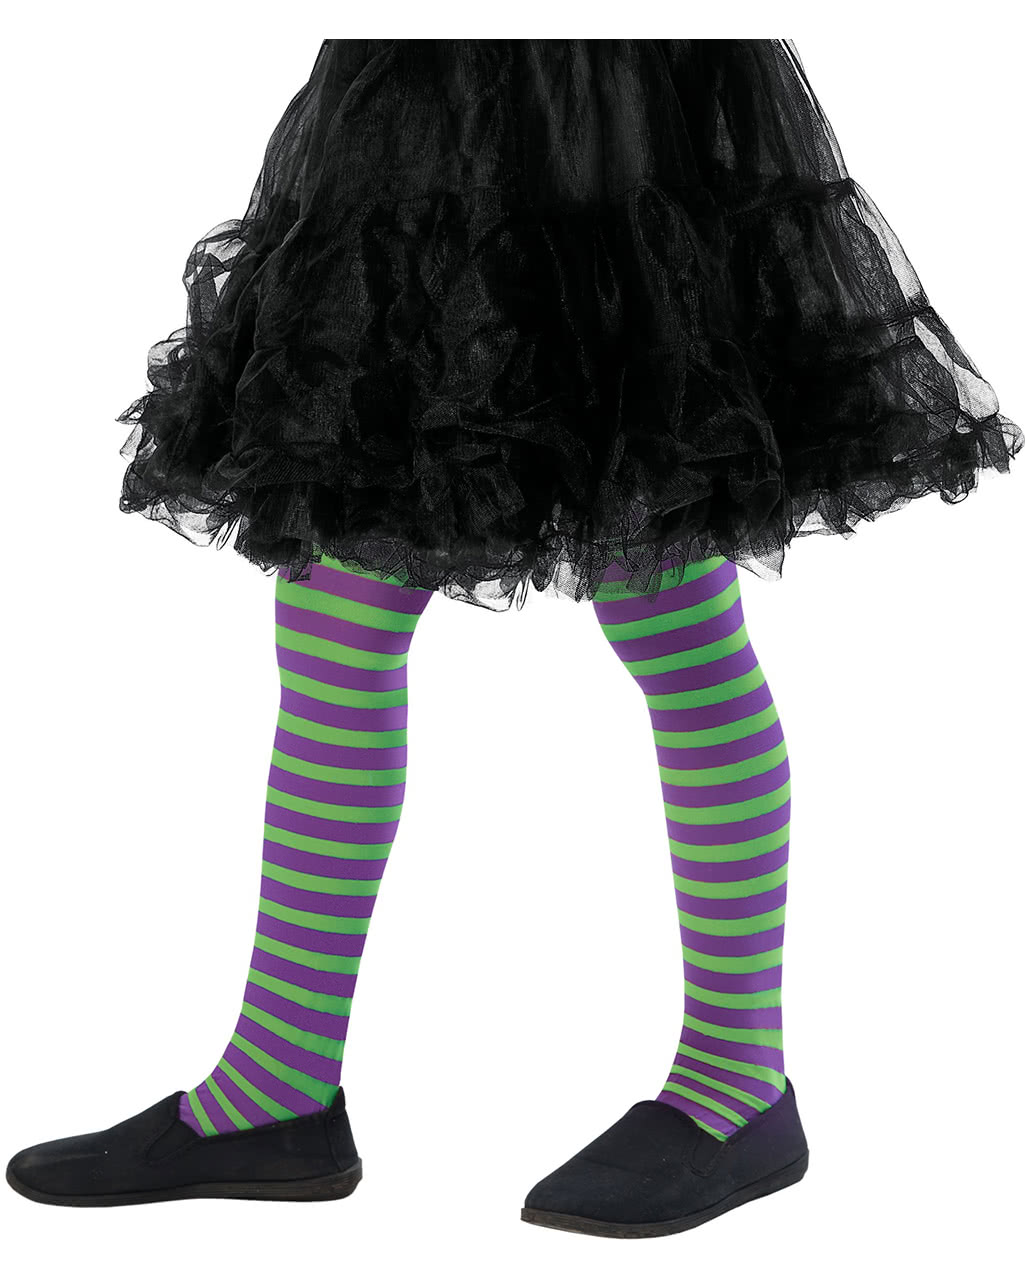 Childrens Black and Purple Striped Tights